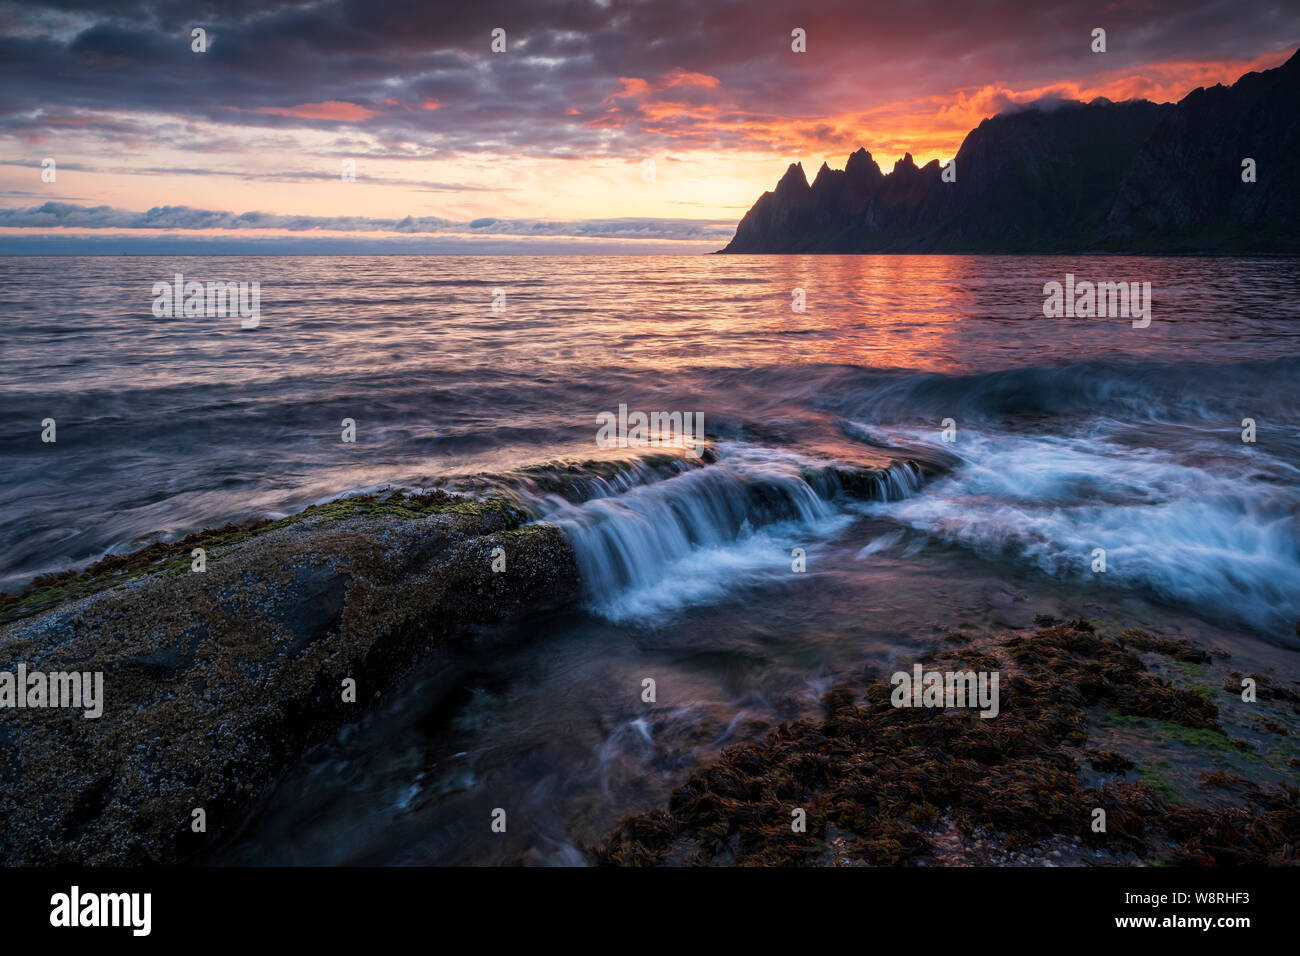 Waves crushing over mighty rocks with impressive oksen Mountains in background at a colorful midnight sunset, Tungeneset, Devils Jaw, Senja, Norw Stock Photo